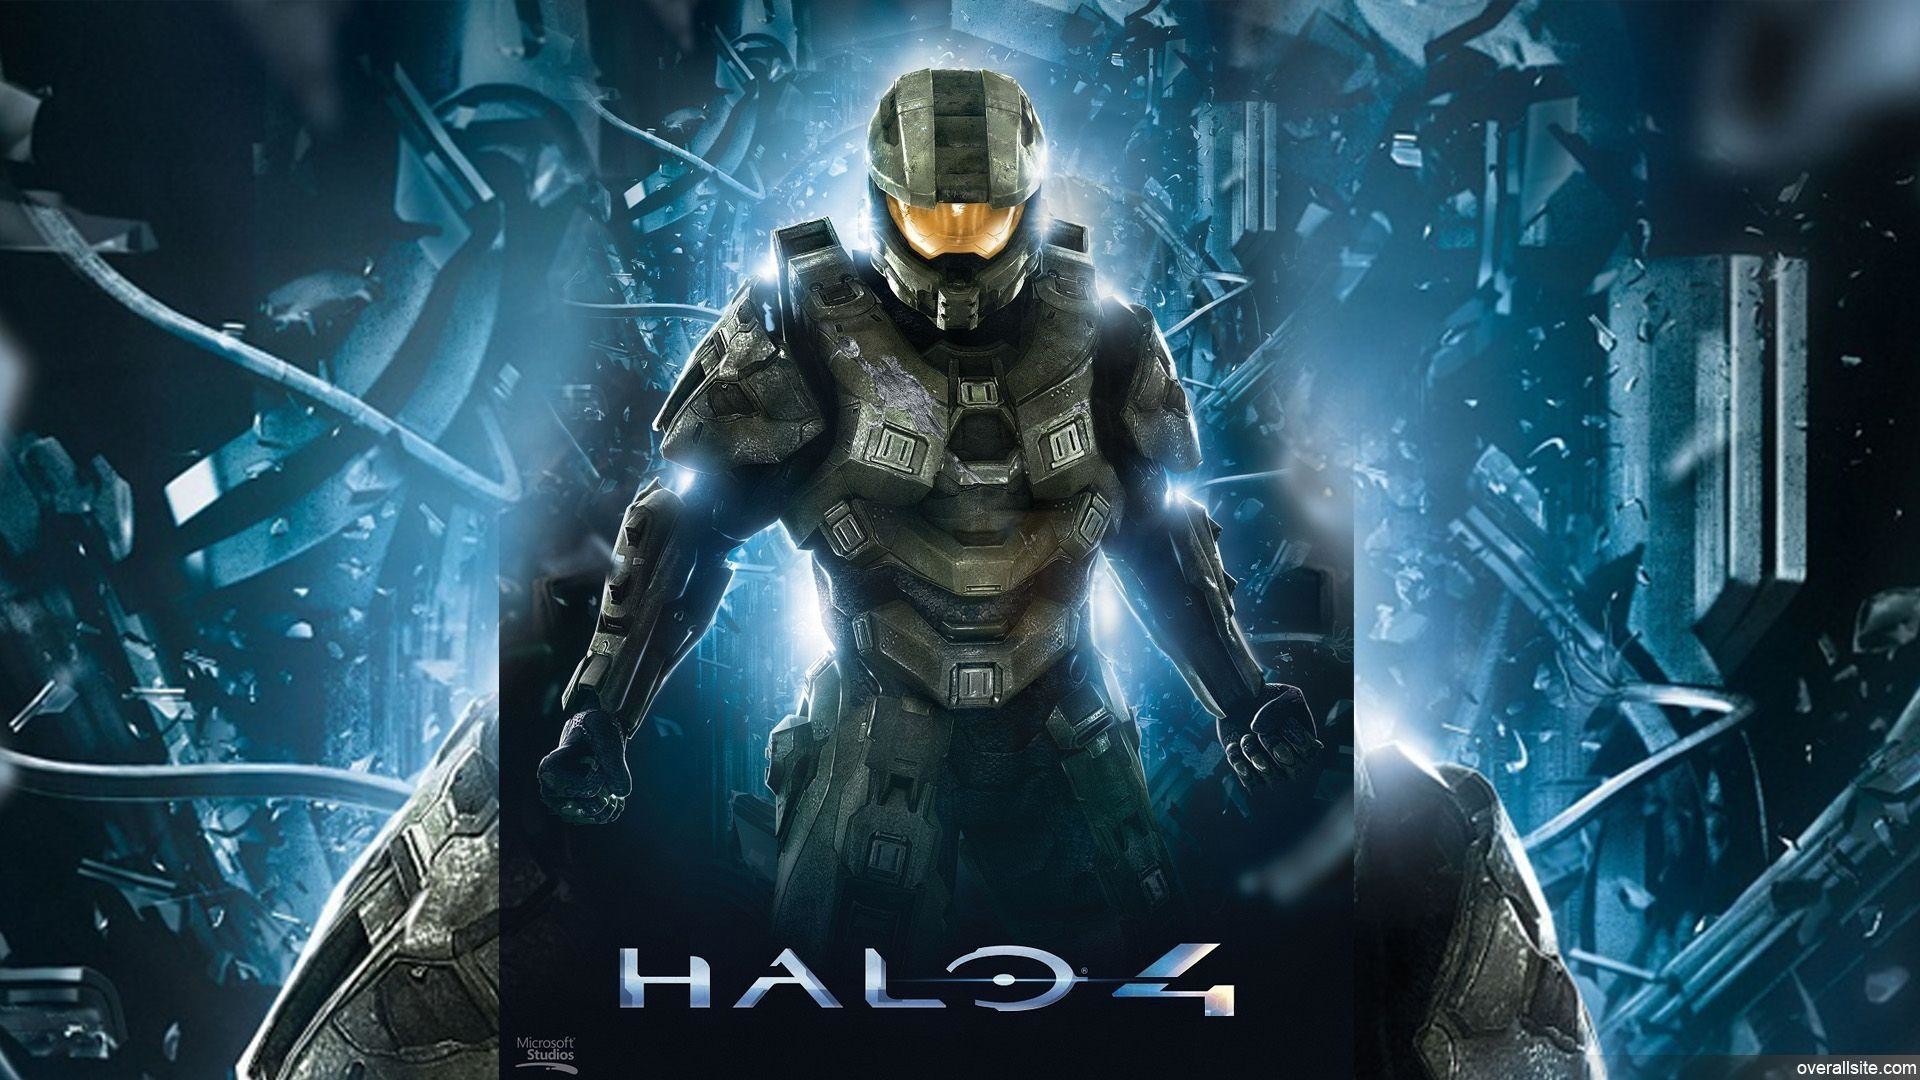 1920x1080 Wallpapers For > Halo 4 Unsc Wallpaper Hd